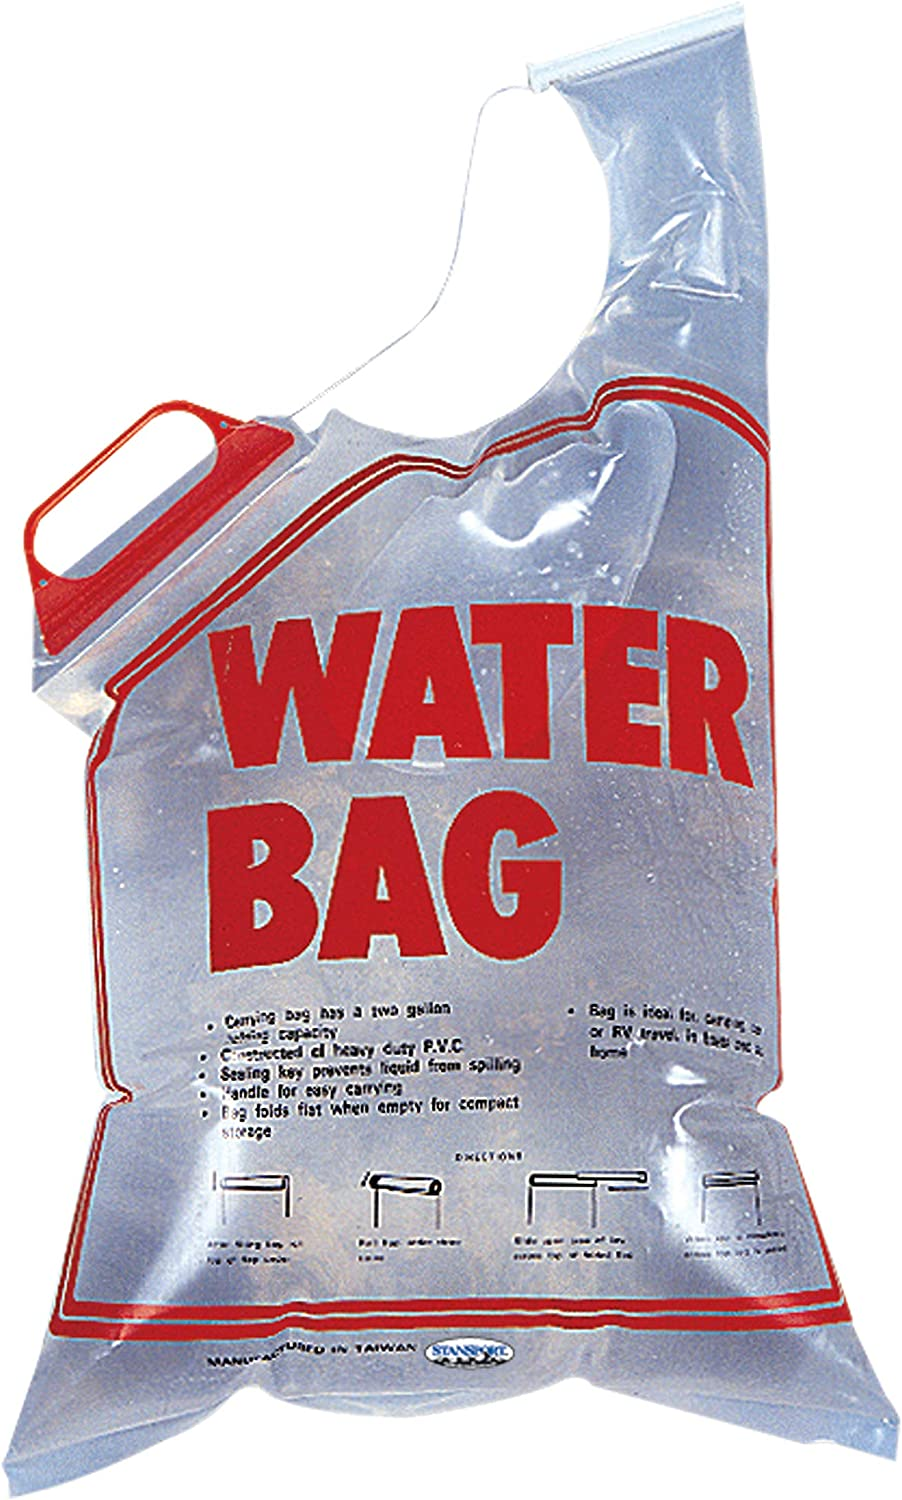 Stansport 2 Gallon Water Bag (292) $4.99